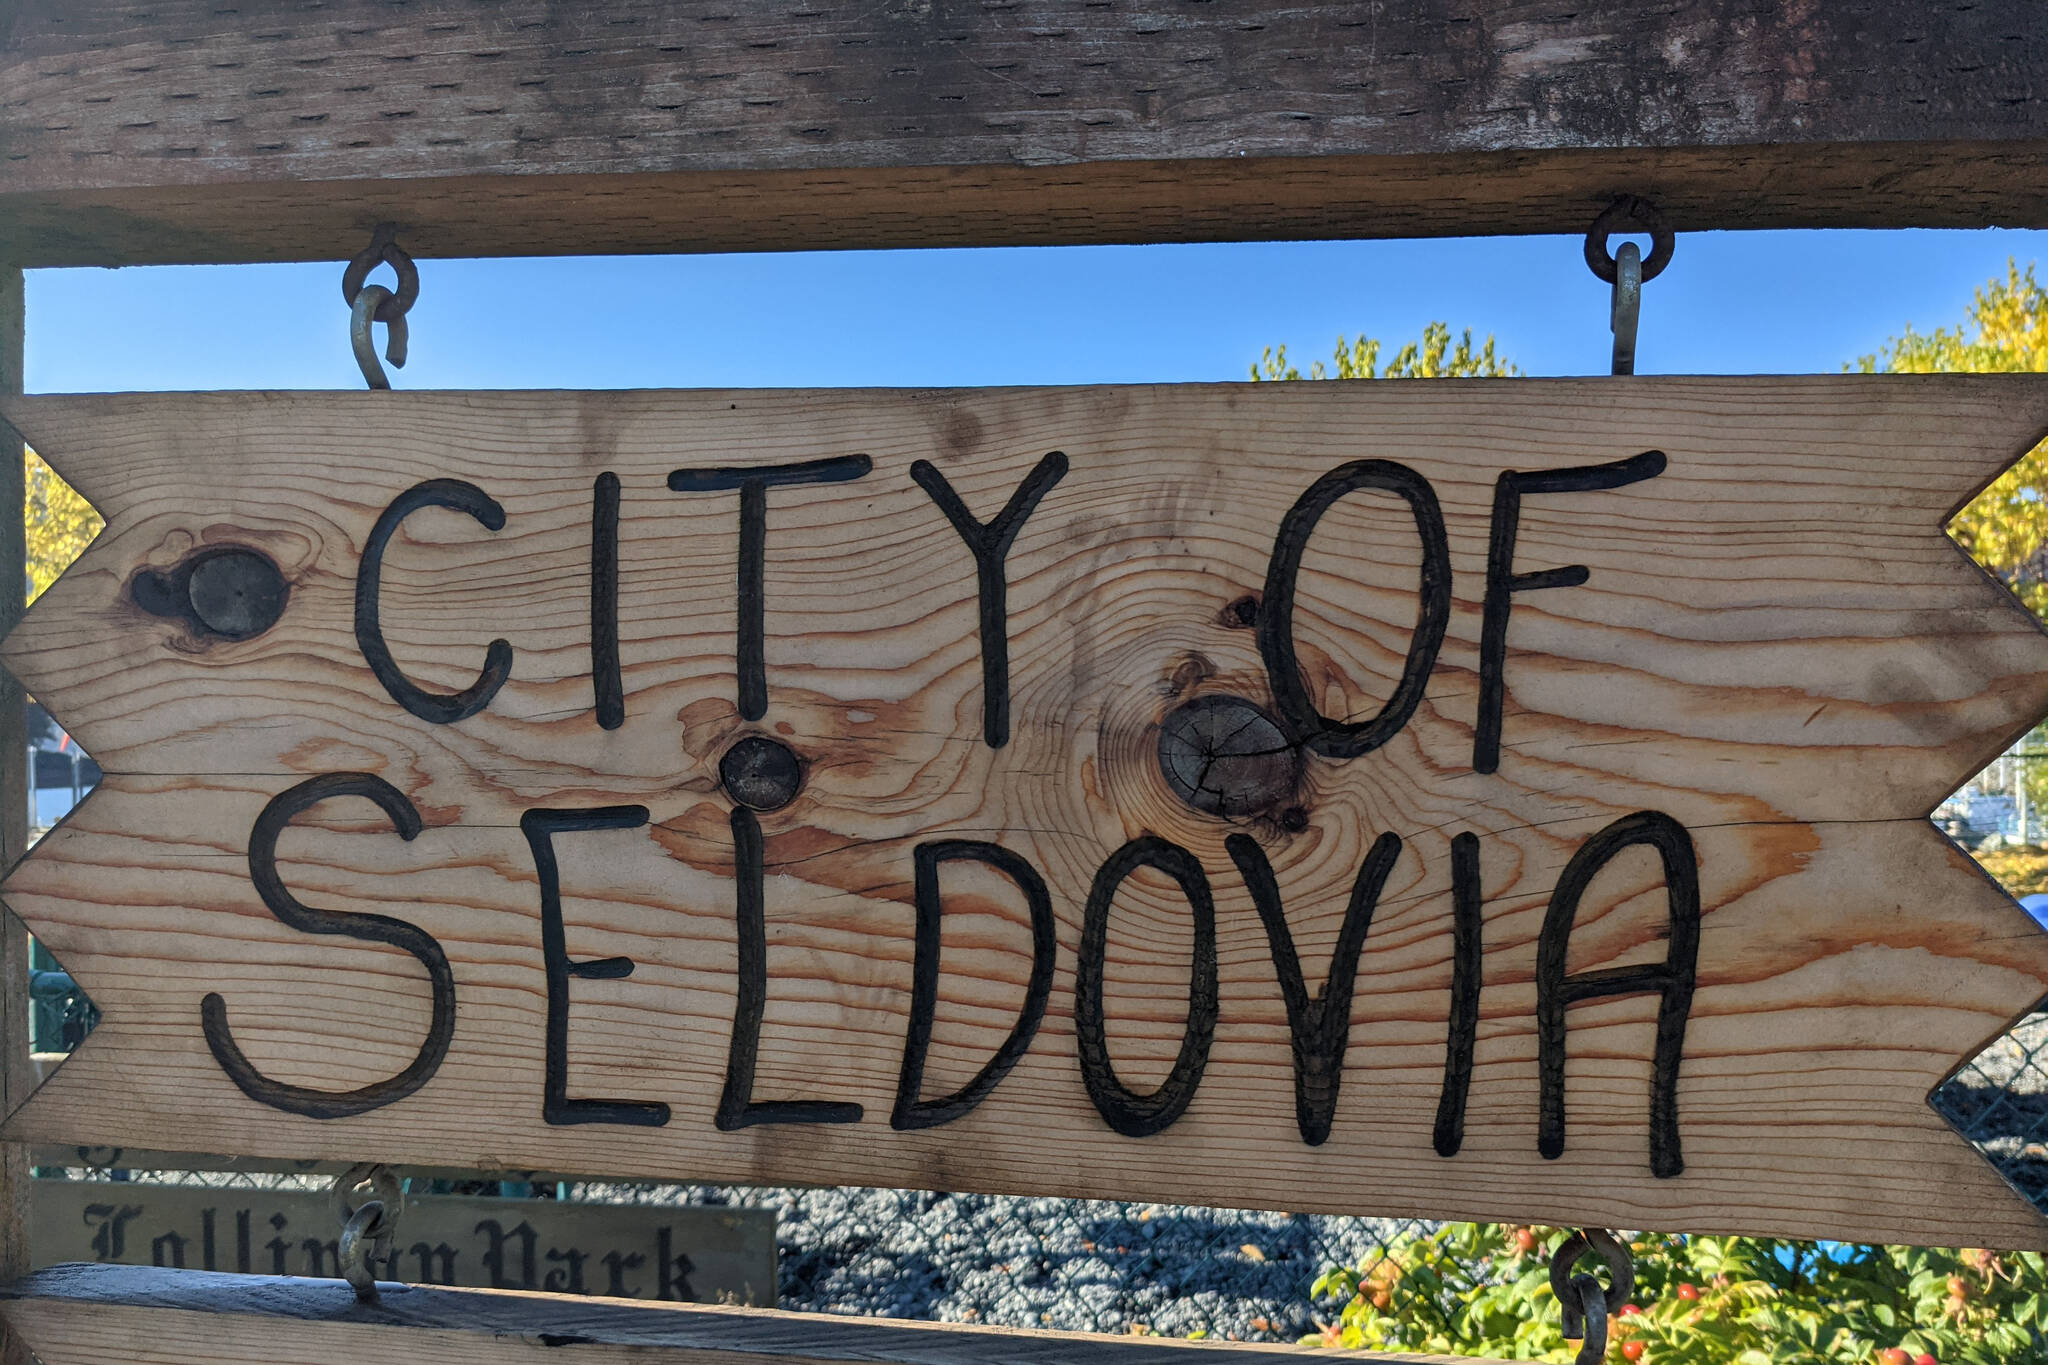 A sign in downtown Seldovia is photographed on Sept. 27, 2021. (Peninsula Clarion file)